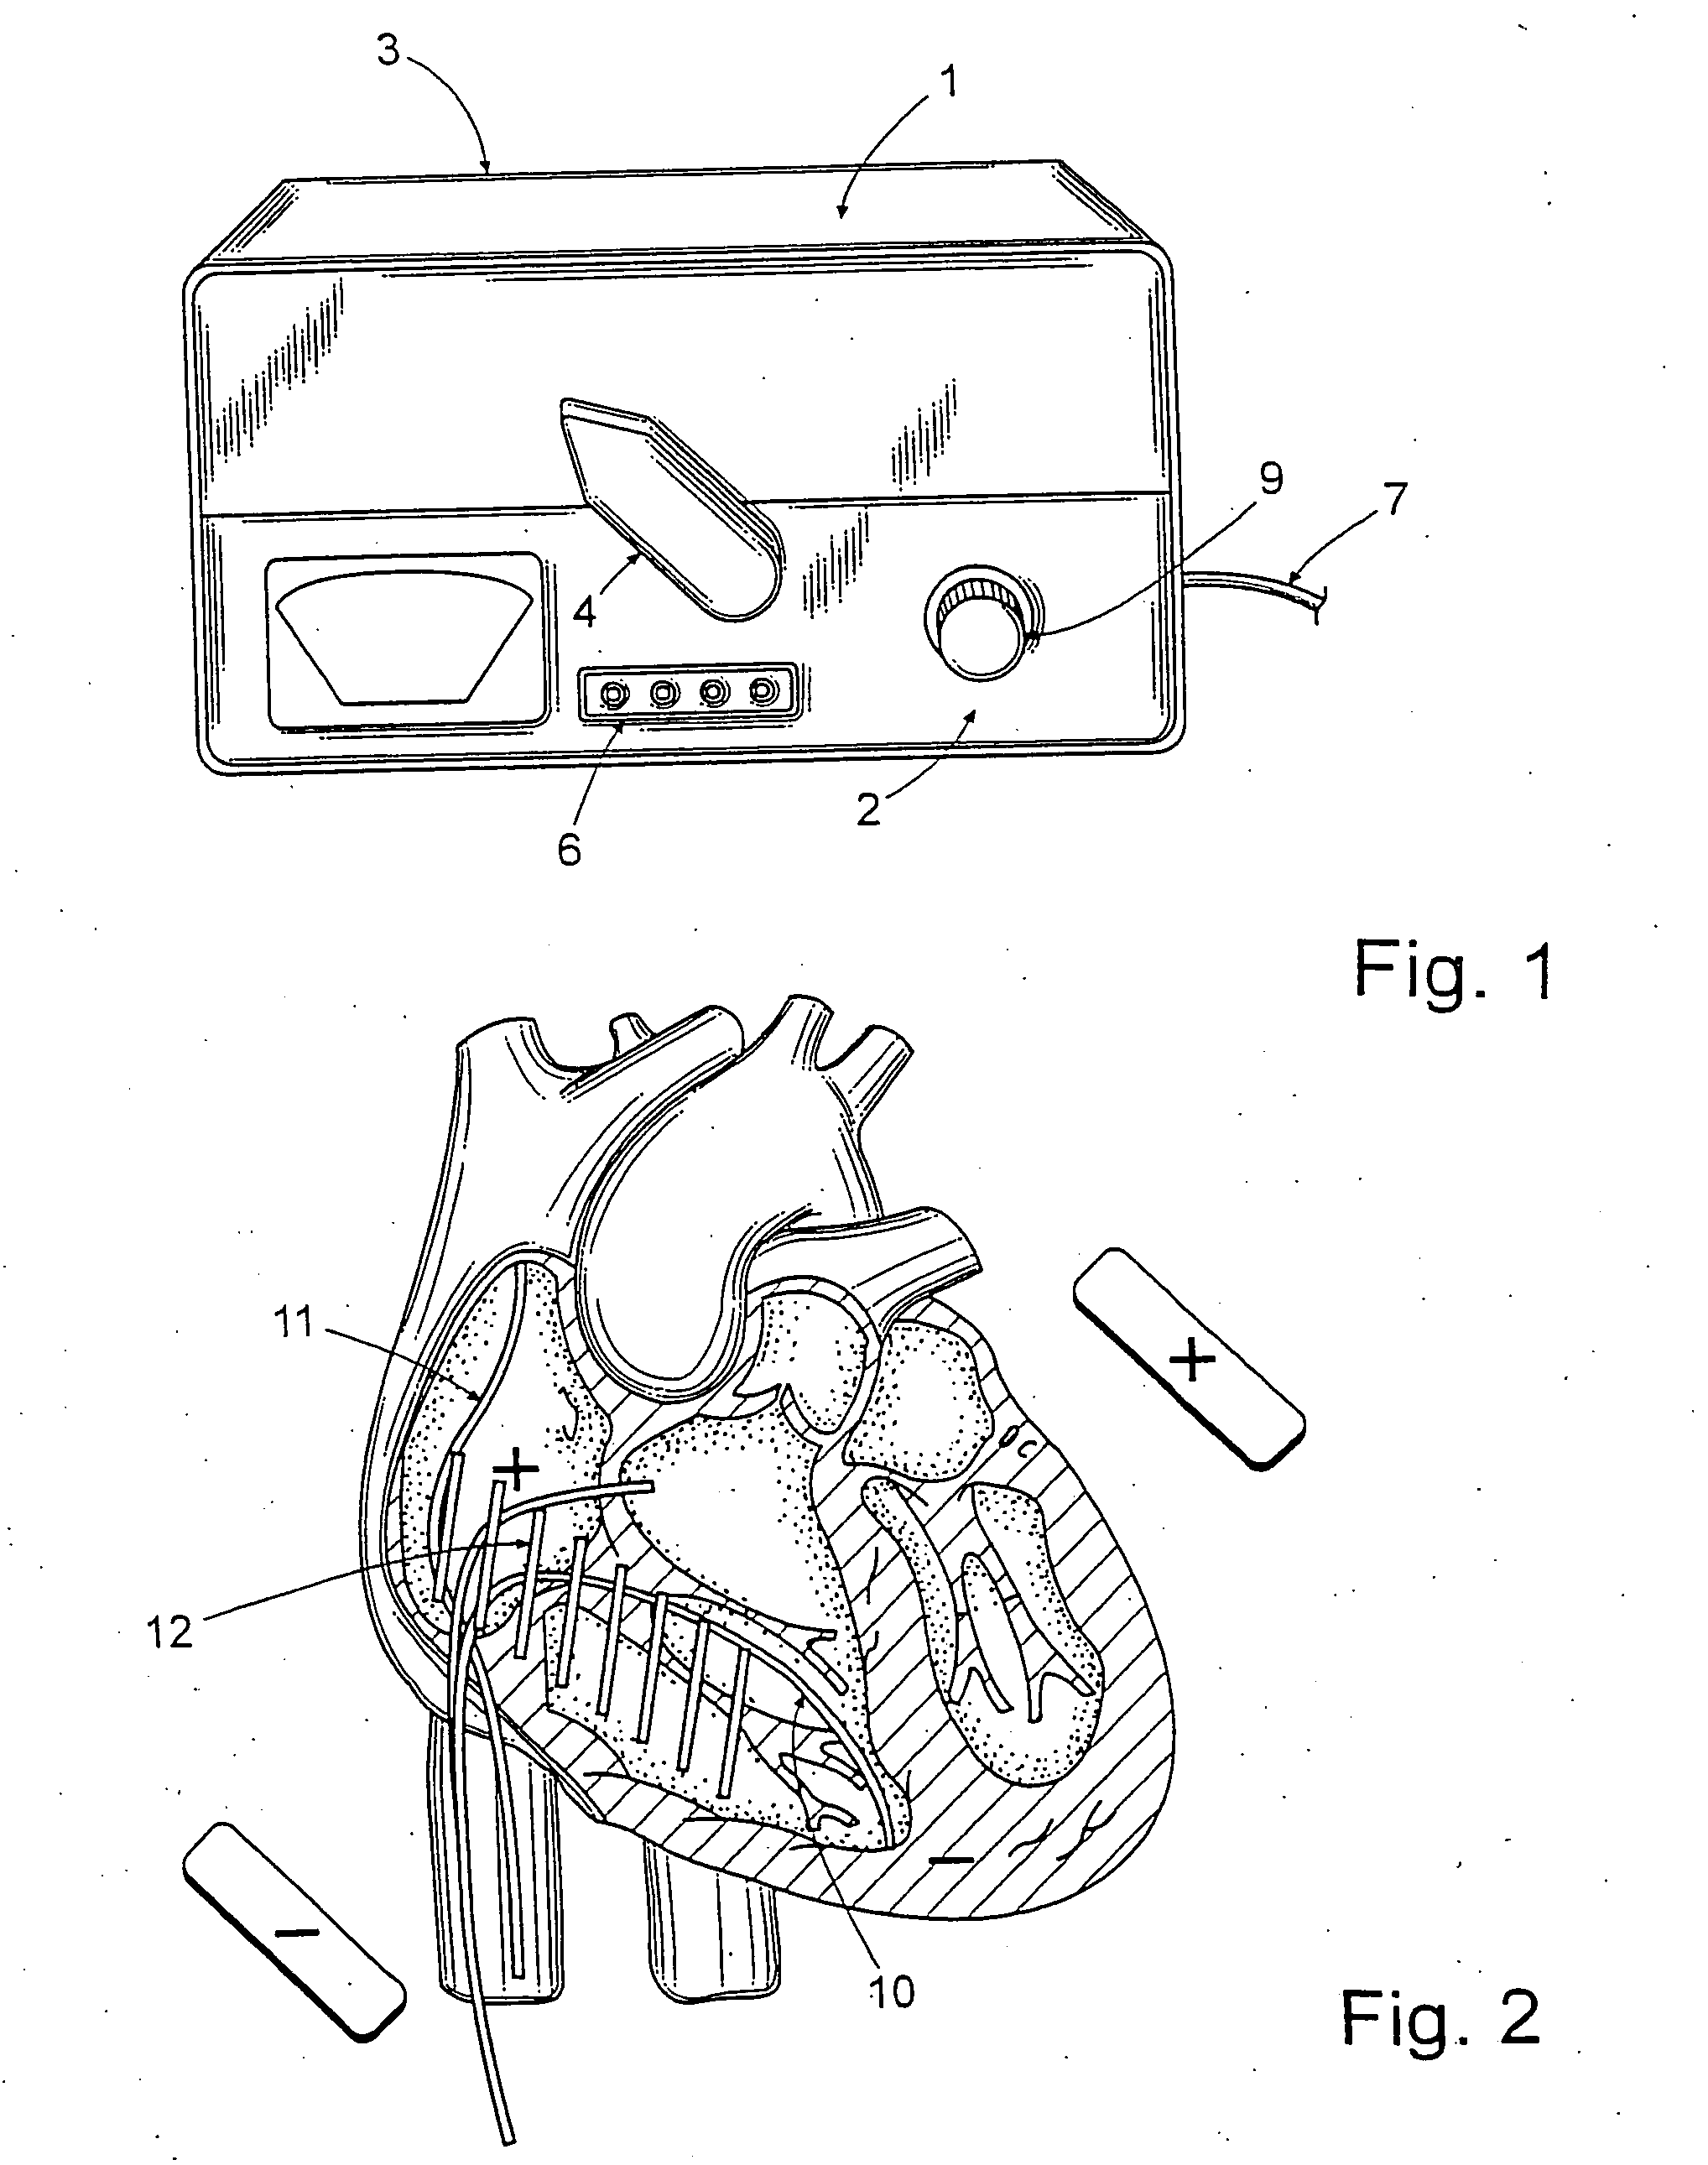 Apparatus and method for cardioversion